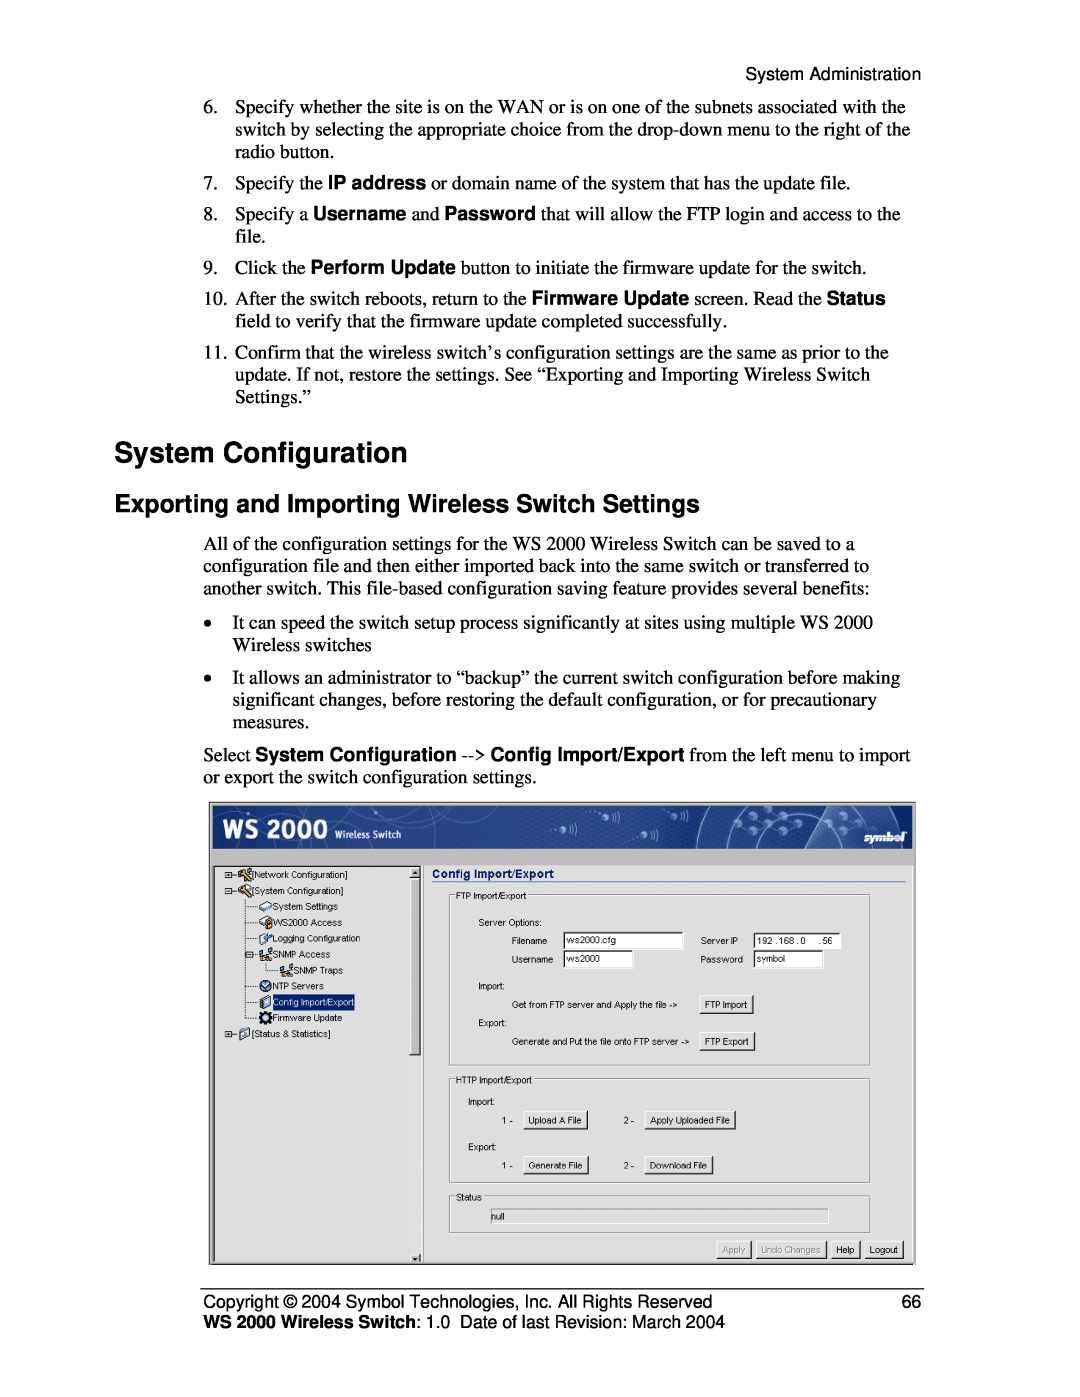 Symbol Technologies WS 2000 manual System Configuration, Exporting and Importing Wireless Switch Settings 